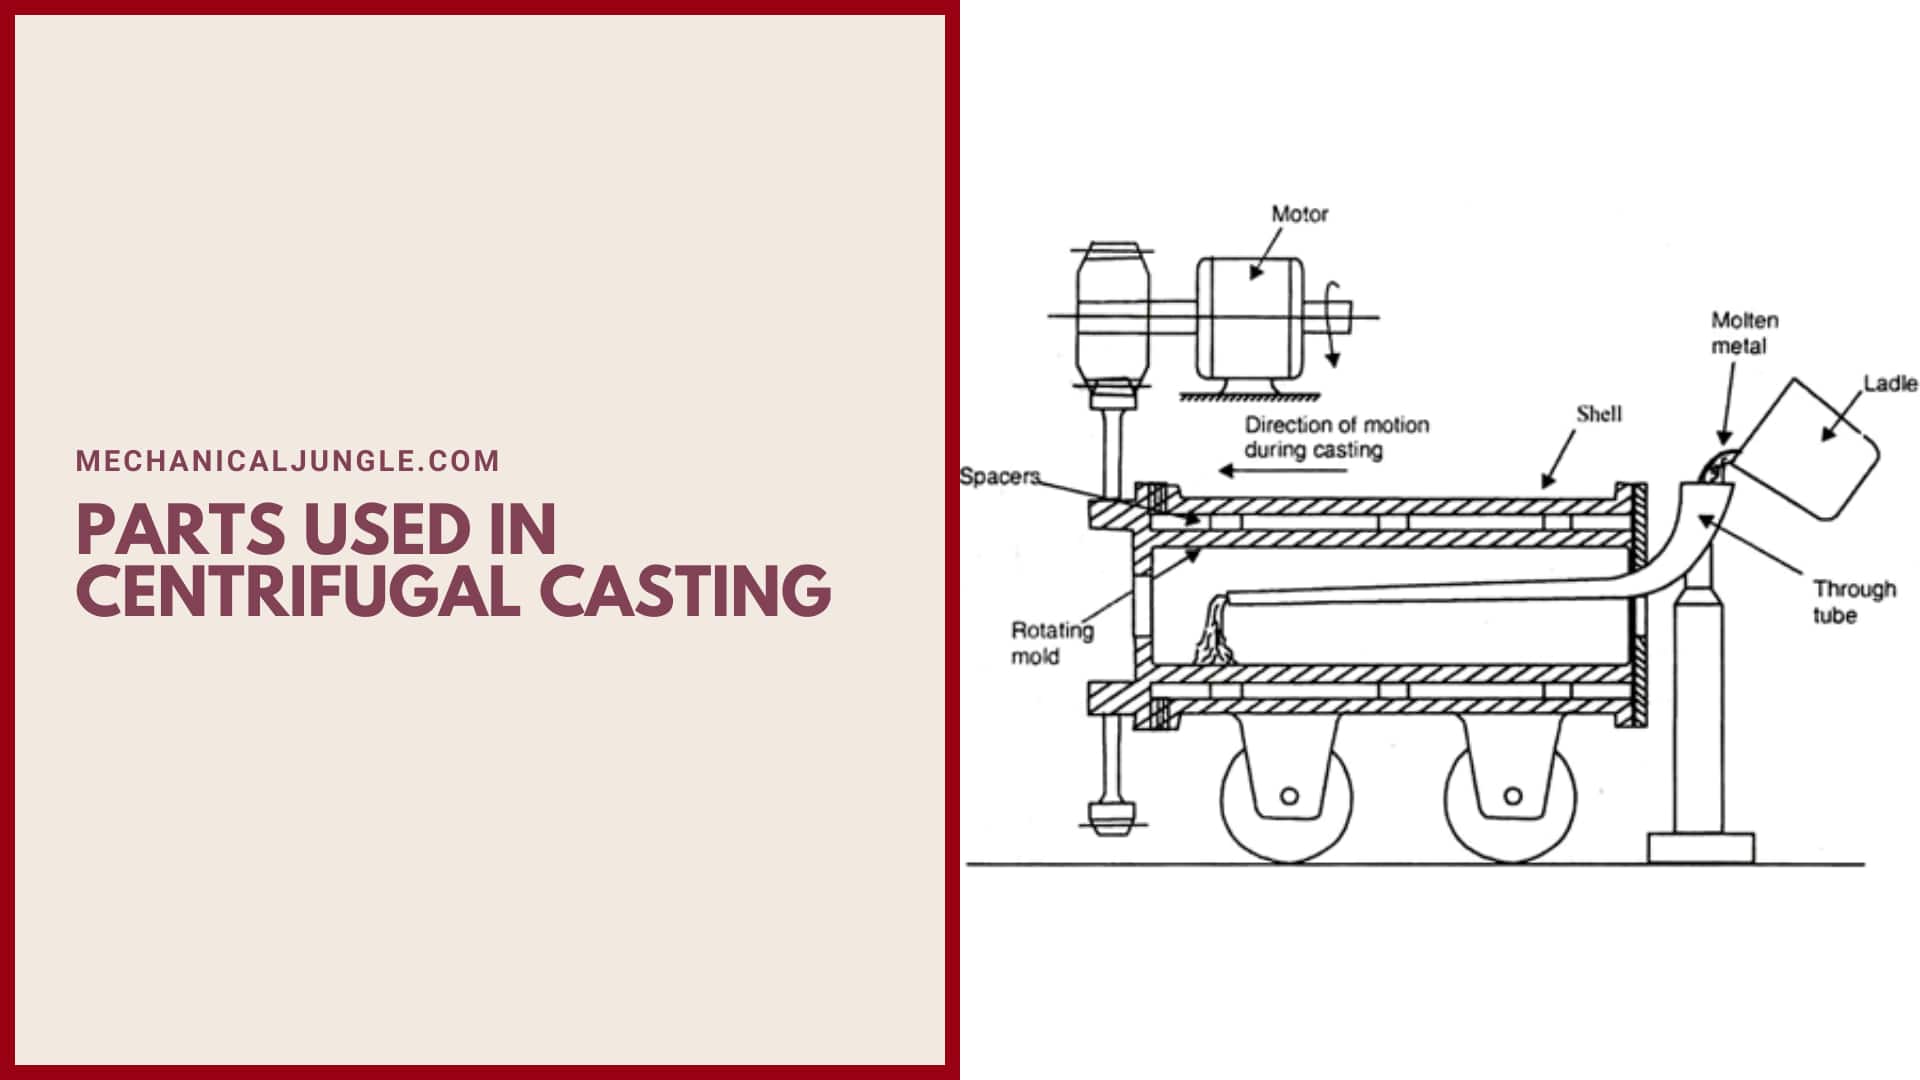 Parts Used in Centrifugal Casting